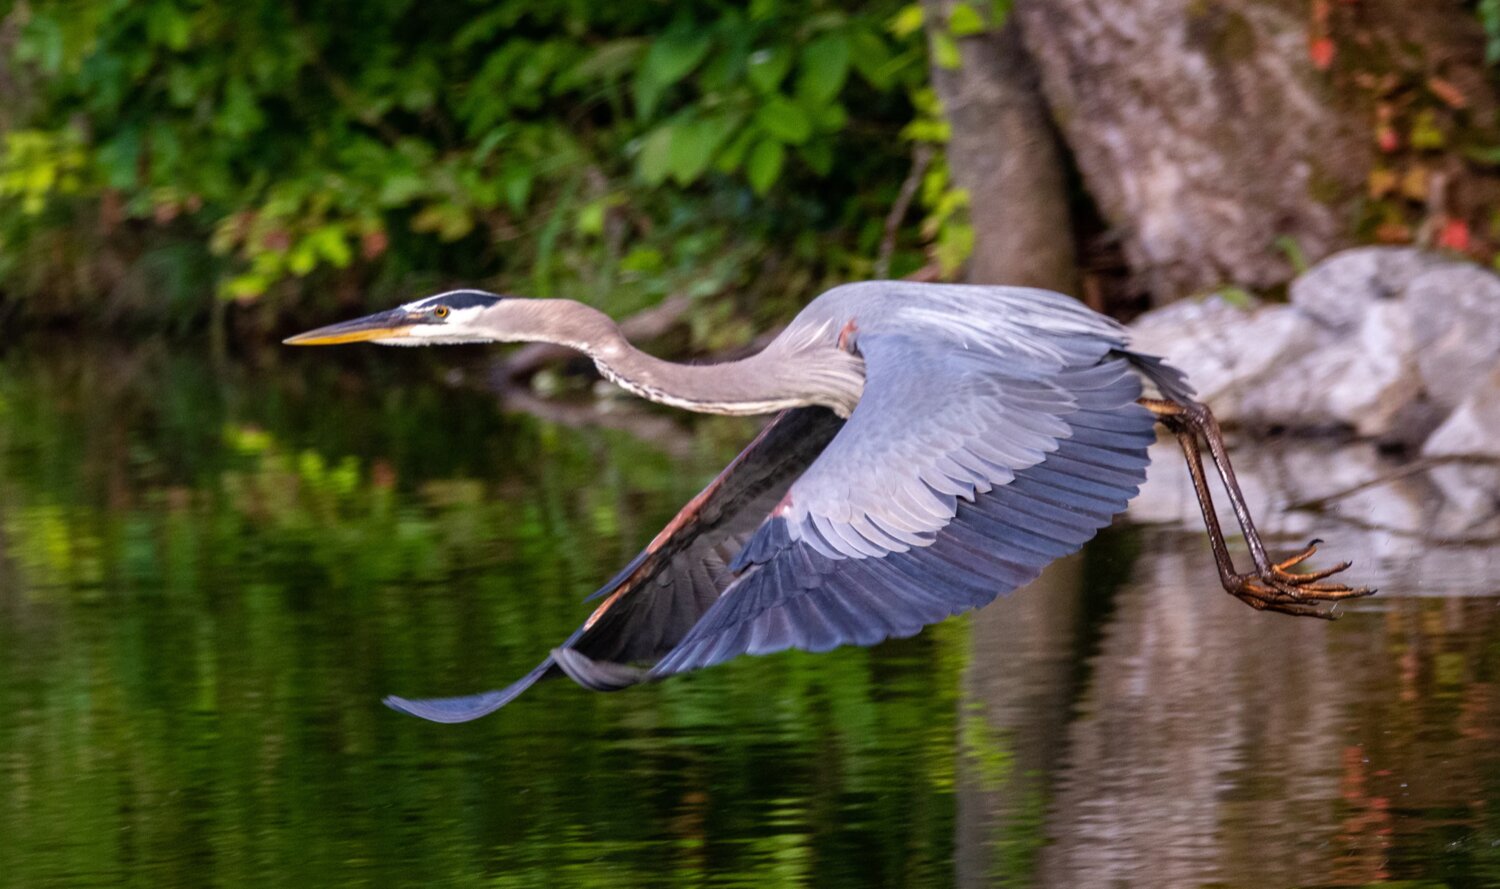 Ther Great Blue Heron.